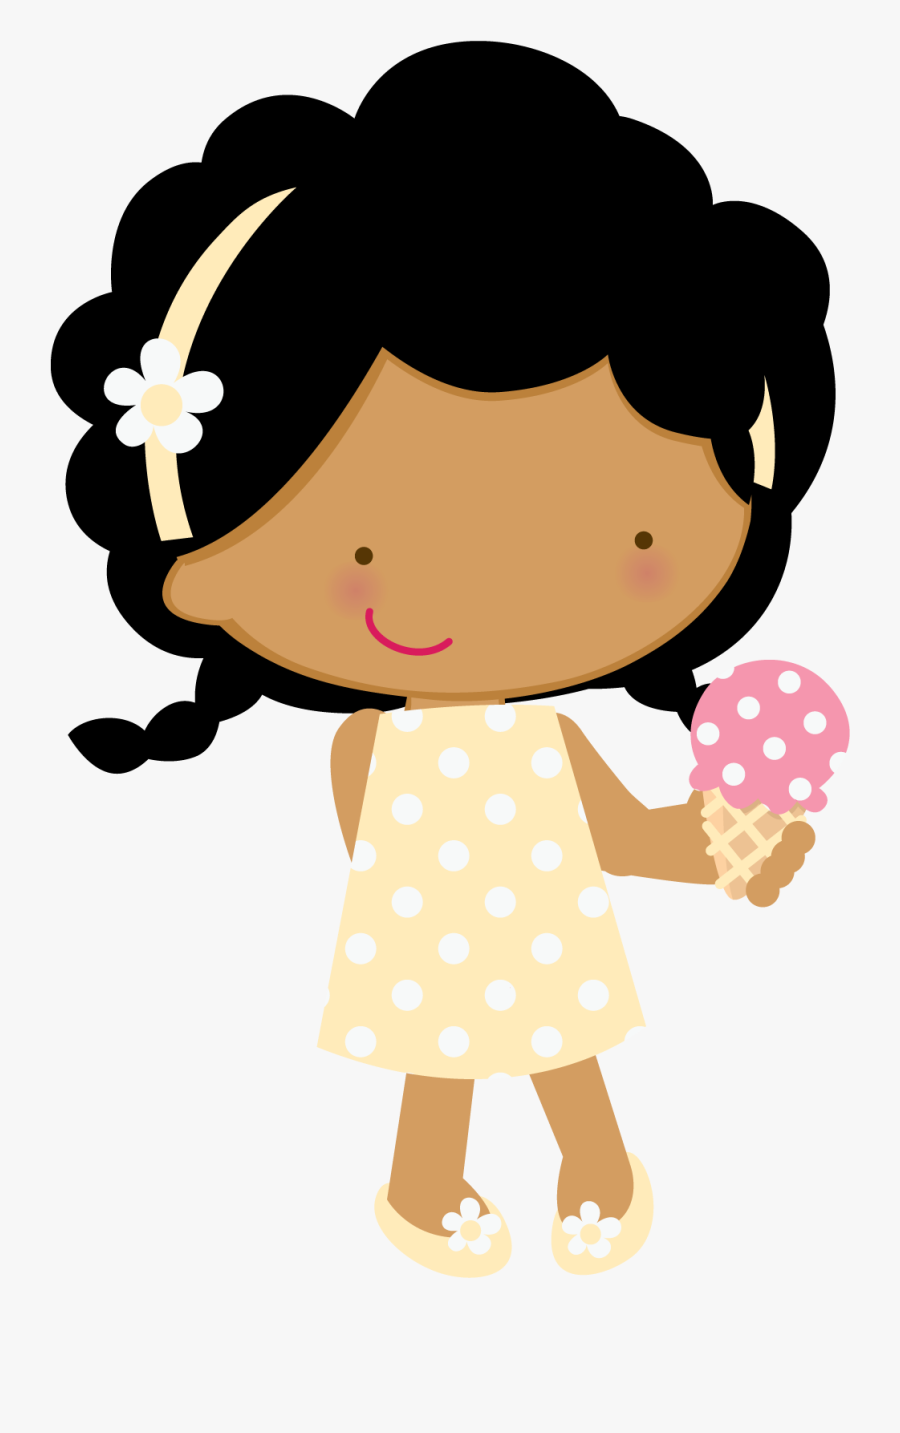 Transparent Doll Clipart - Girl Eating Ice Cream Clipart, Transparent Clipart